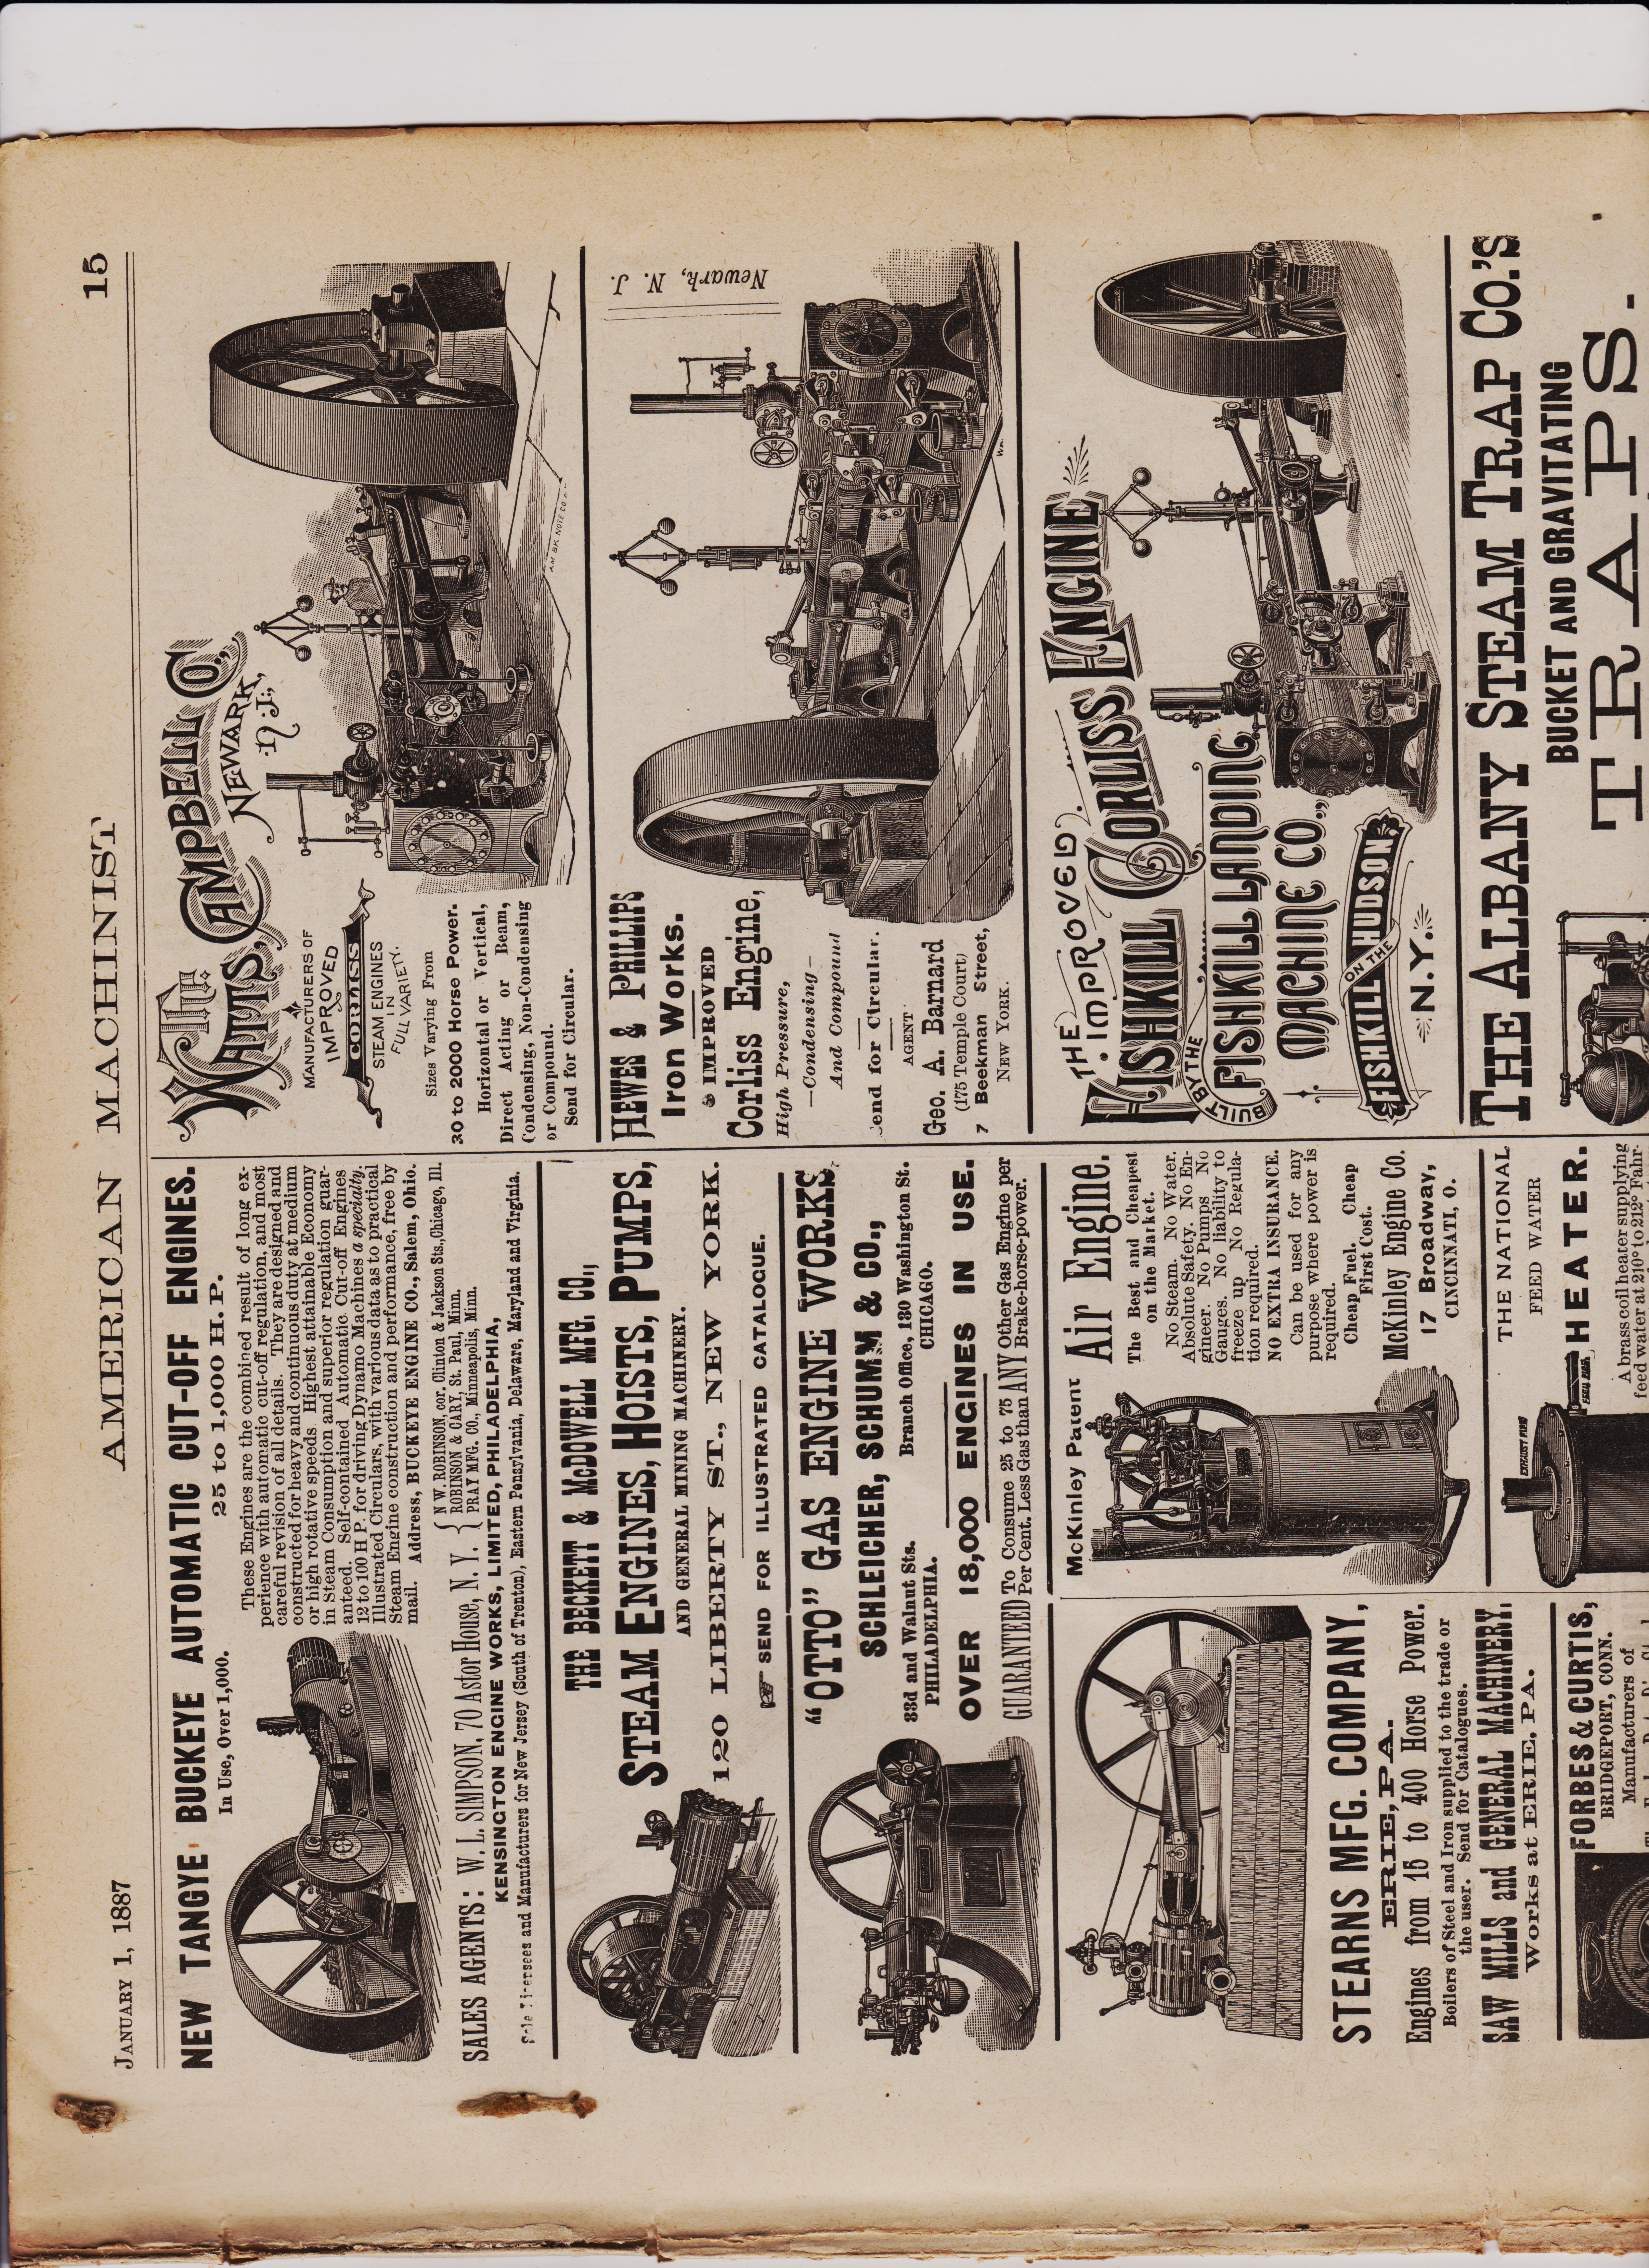 https://antiquemachinery.com/images-American-Machinist-Jan-1-1887/American-Machinist-Jan-1-1887-pg-15-top-Tange-buckeye-Watts-Cambel-Co-Hews-and-Phillips-Fichkill-Coreless-Engine-Otto-Gas-Engine-Works-F-B-A-Belden-Skinner-Steam-Engine-co-Harrisburg-Car-Mfg-Co-Stearns.jpeg